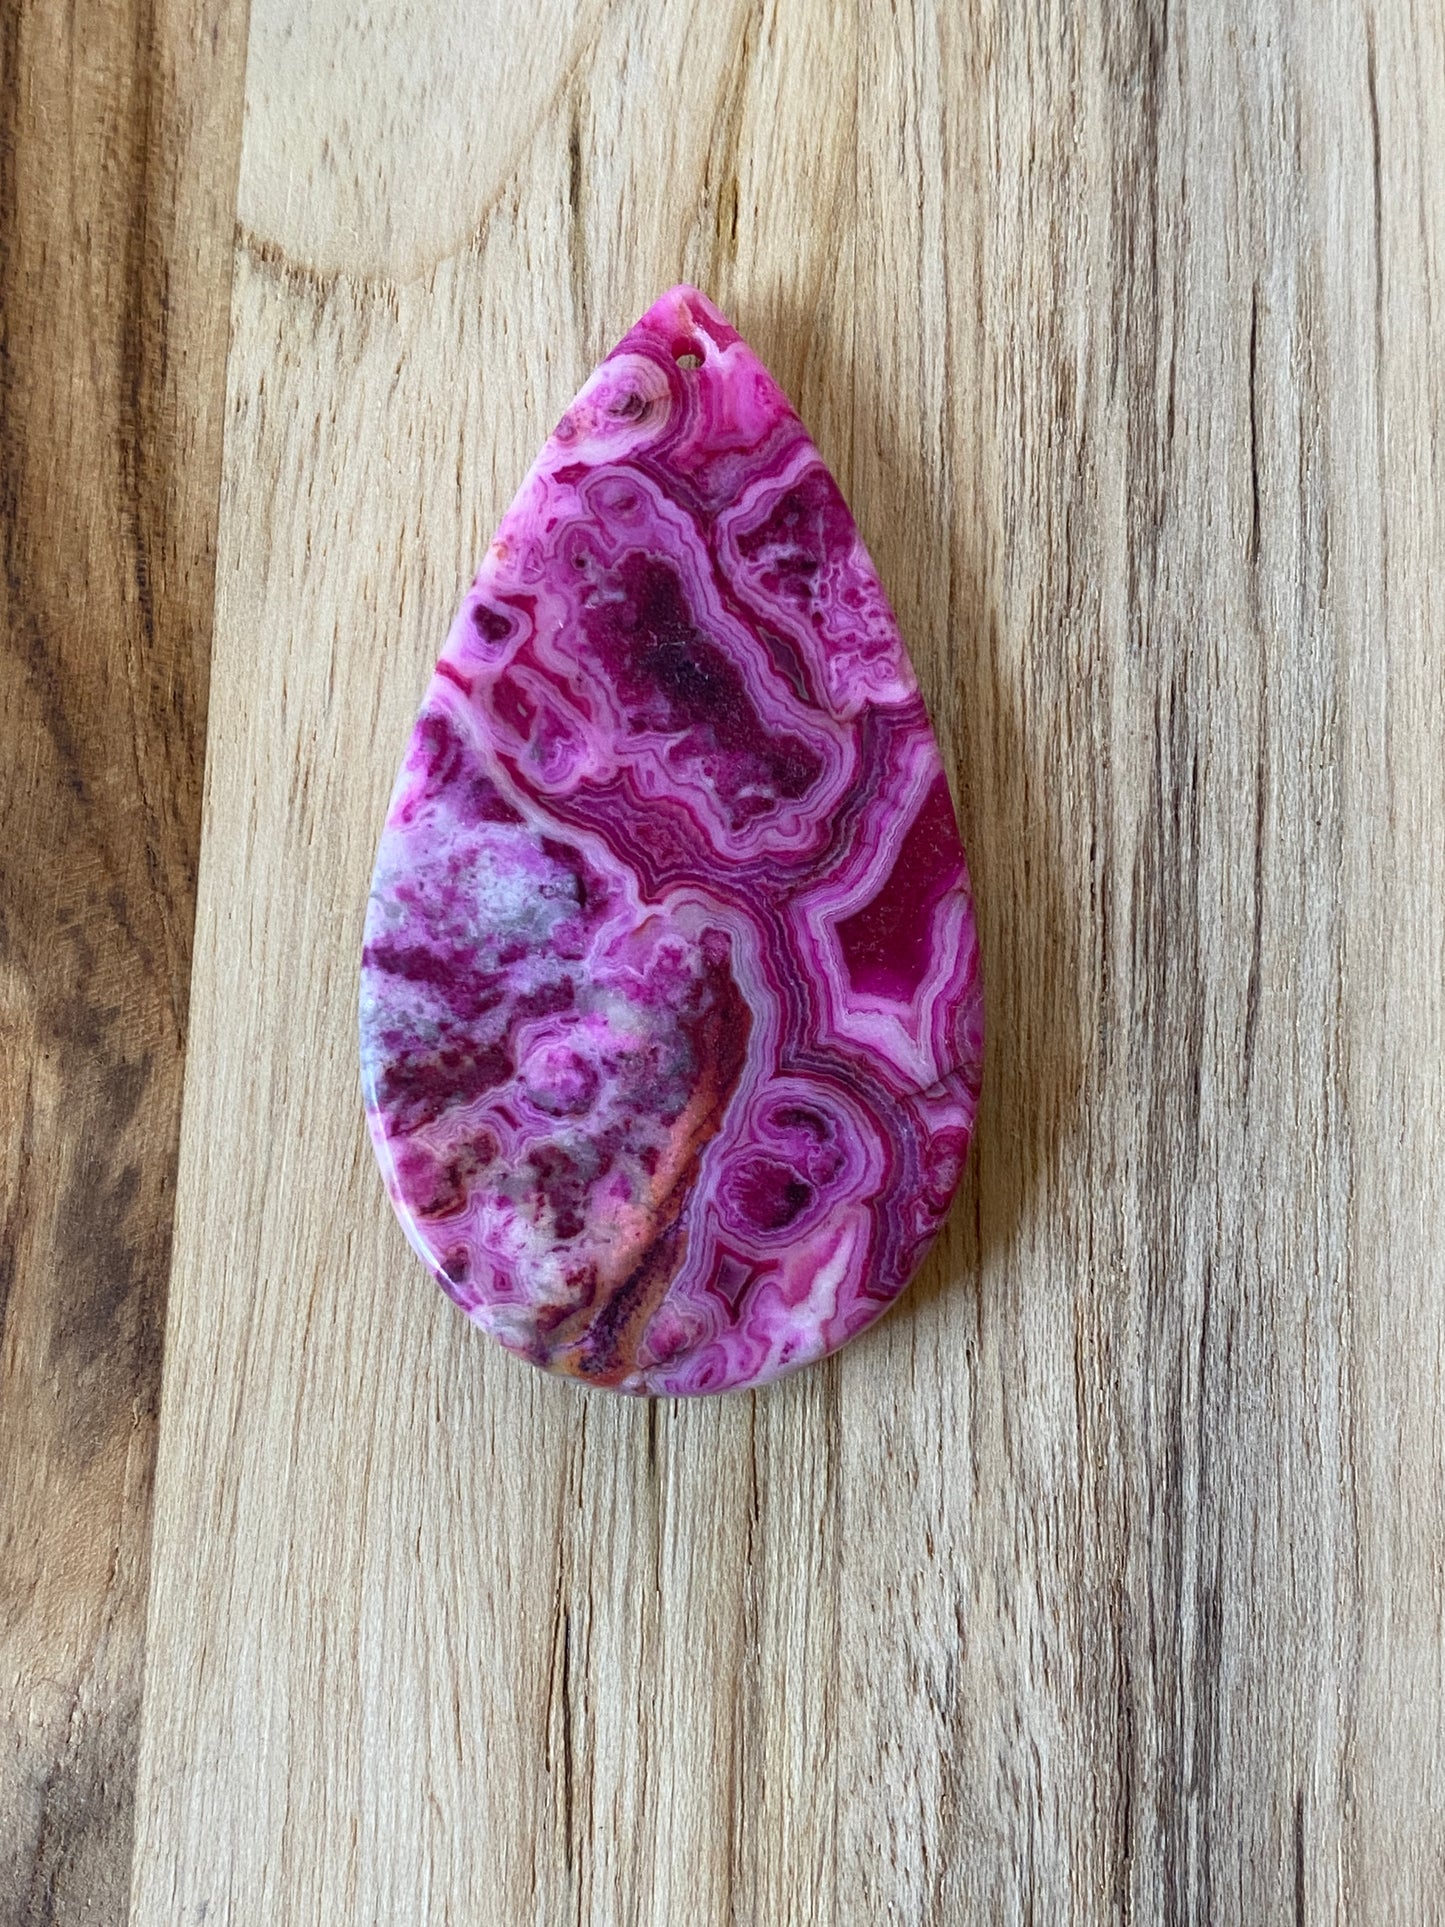 Large Crazy Lace Agate Pendant Bead Pink